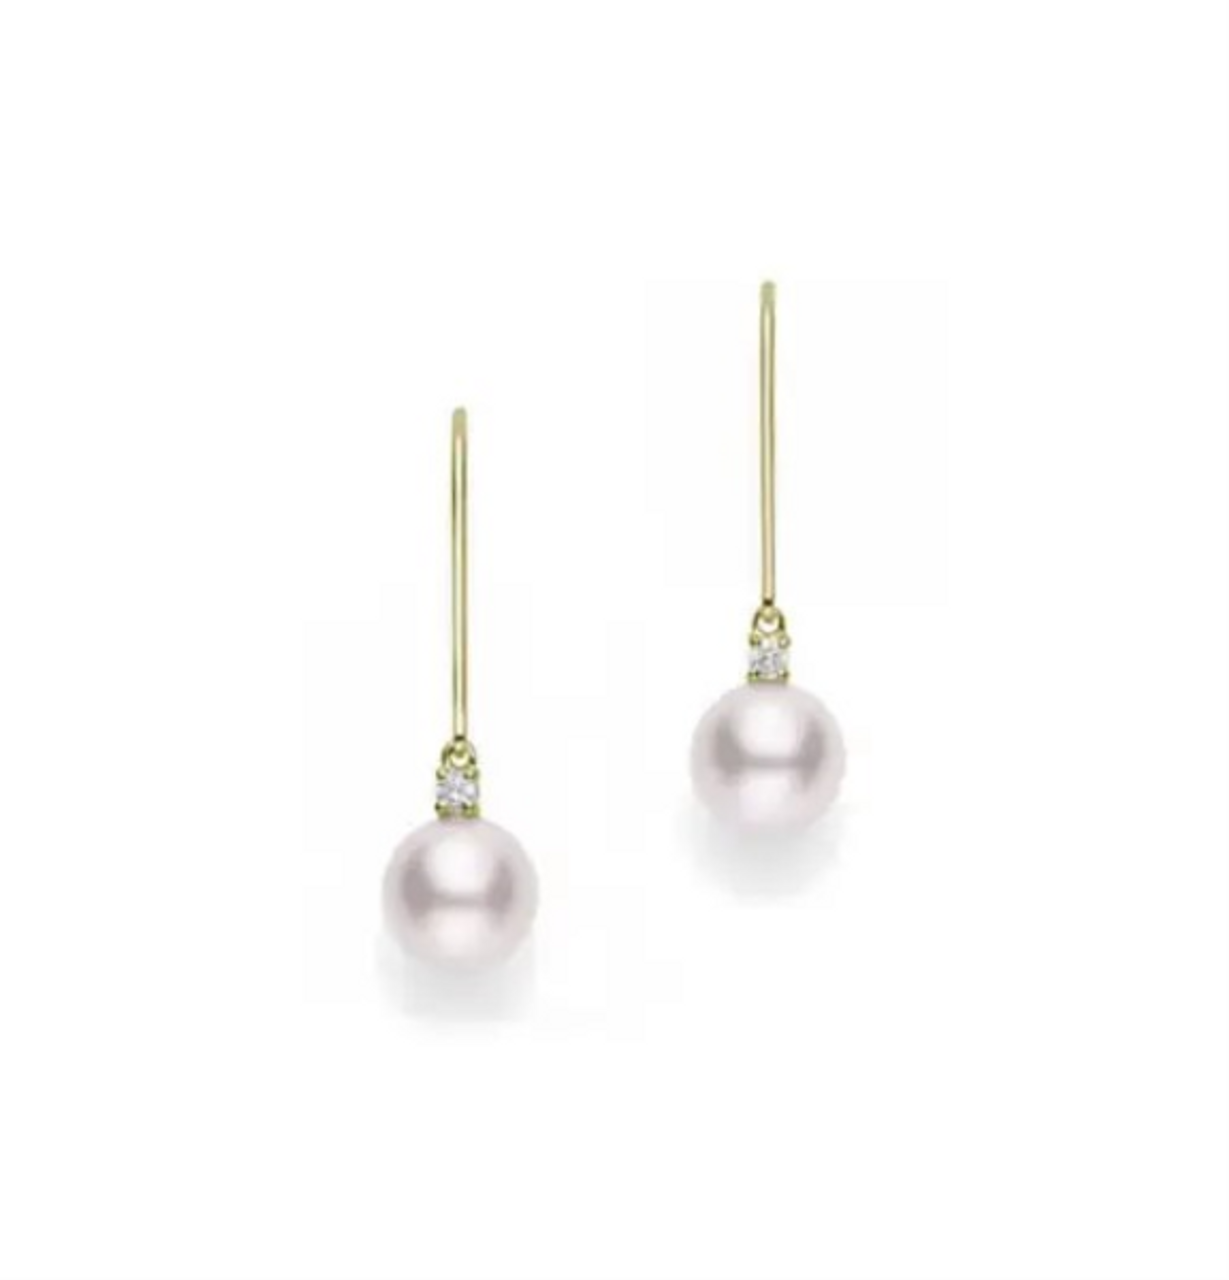 Details more than 197 mikimoto morning dew earrings